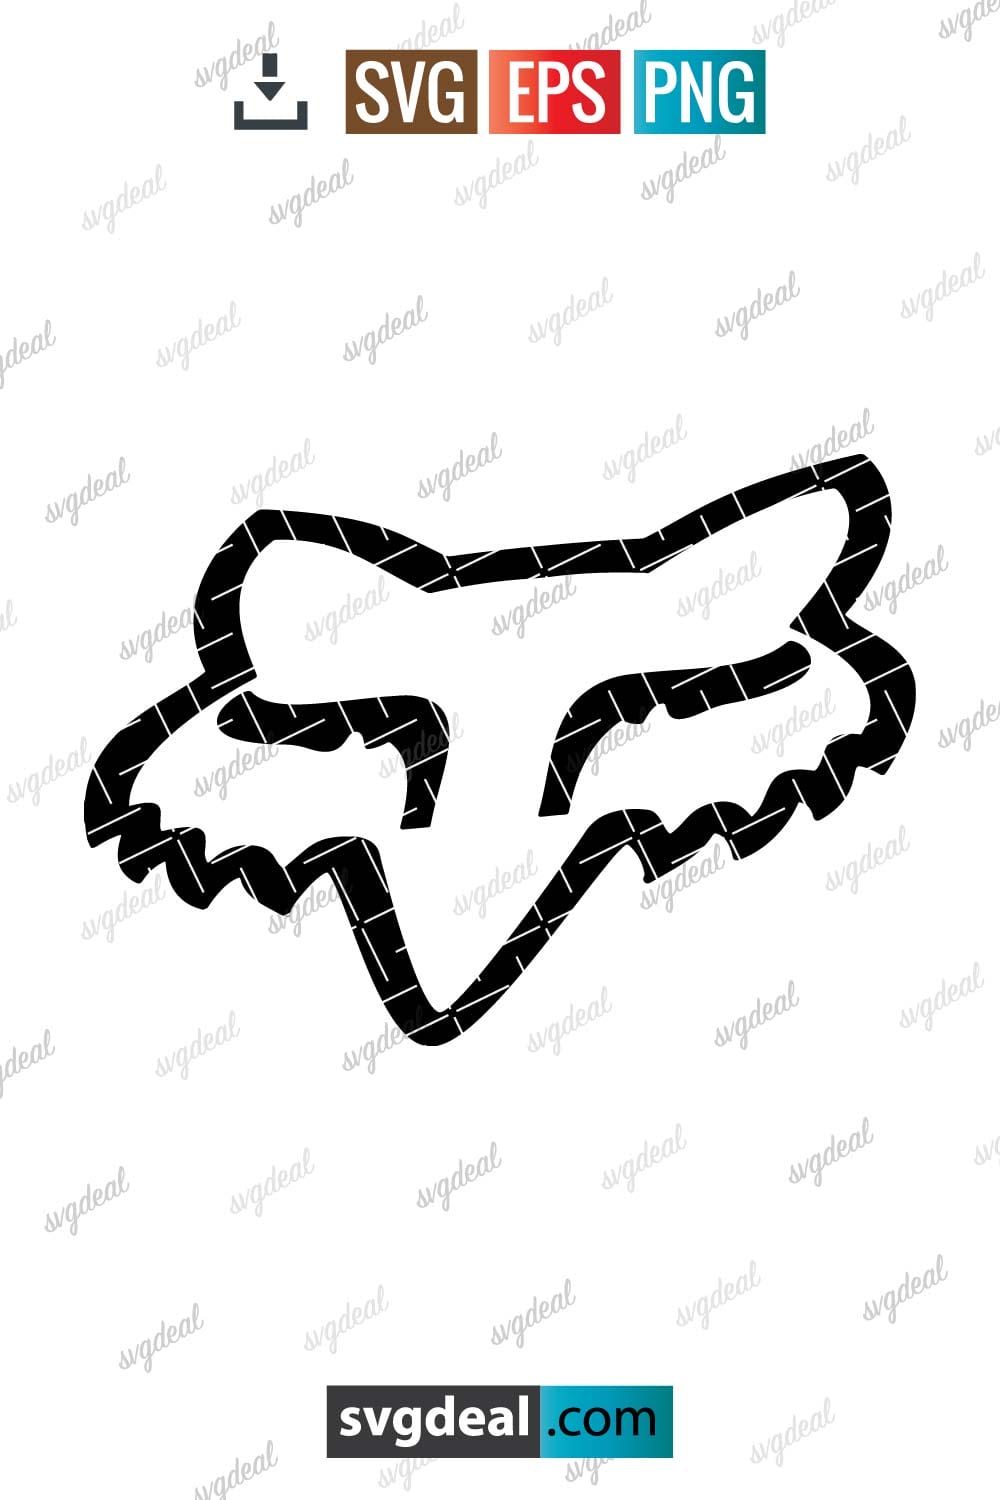 FOX RACING SVG Png Eps and Ai Formats - Ready to use for Cri